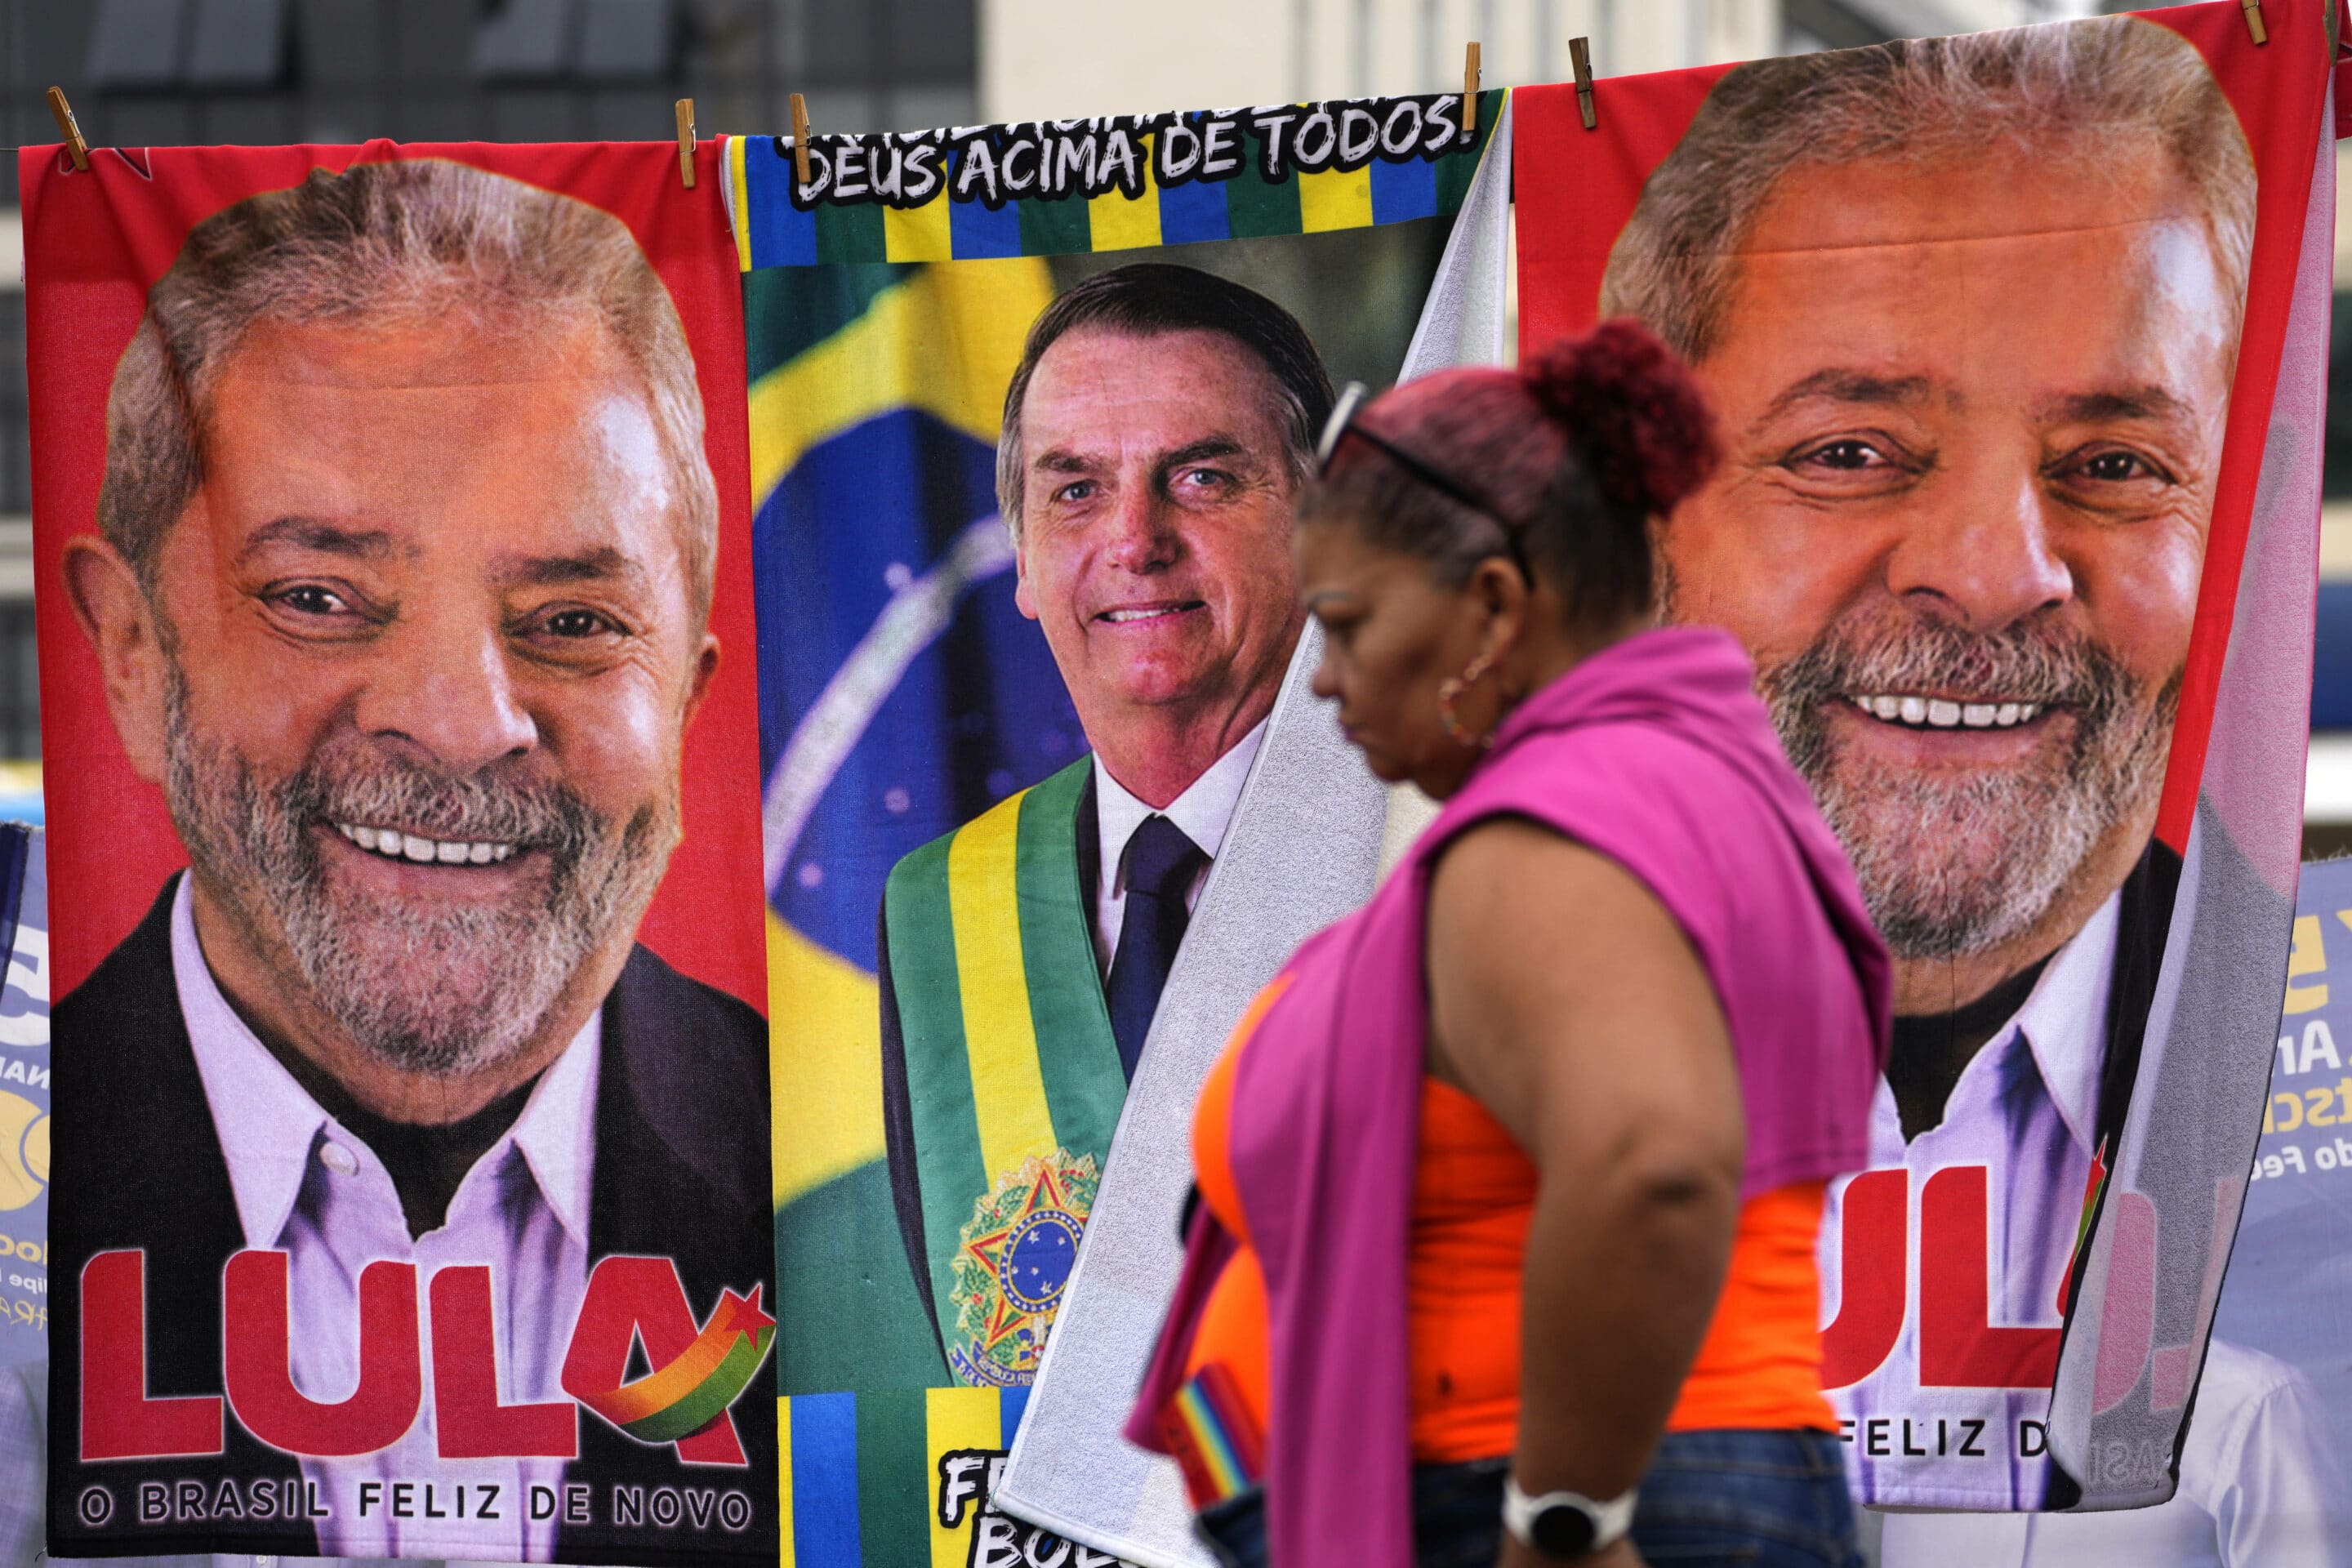 A woman walks past towels emblazoned with images of Brazilian presidential candidates, President Jair Bolsonaro, center, and former President Luiz Inacio Lula da Silva, displayed for sale by a street vendor on a makeshift clothesline, in Brasilia, Brazil, Thursday, Sept. 22, 2022. Brazilians head to polls on Oct. 2 to elect a president, vice president, governors and senators.  (AP Photo/Eraldo Peres)/XEP103/22265640112791//2209222007